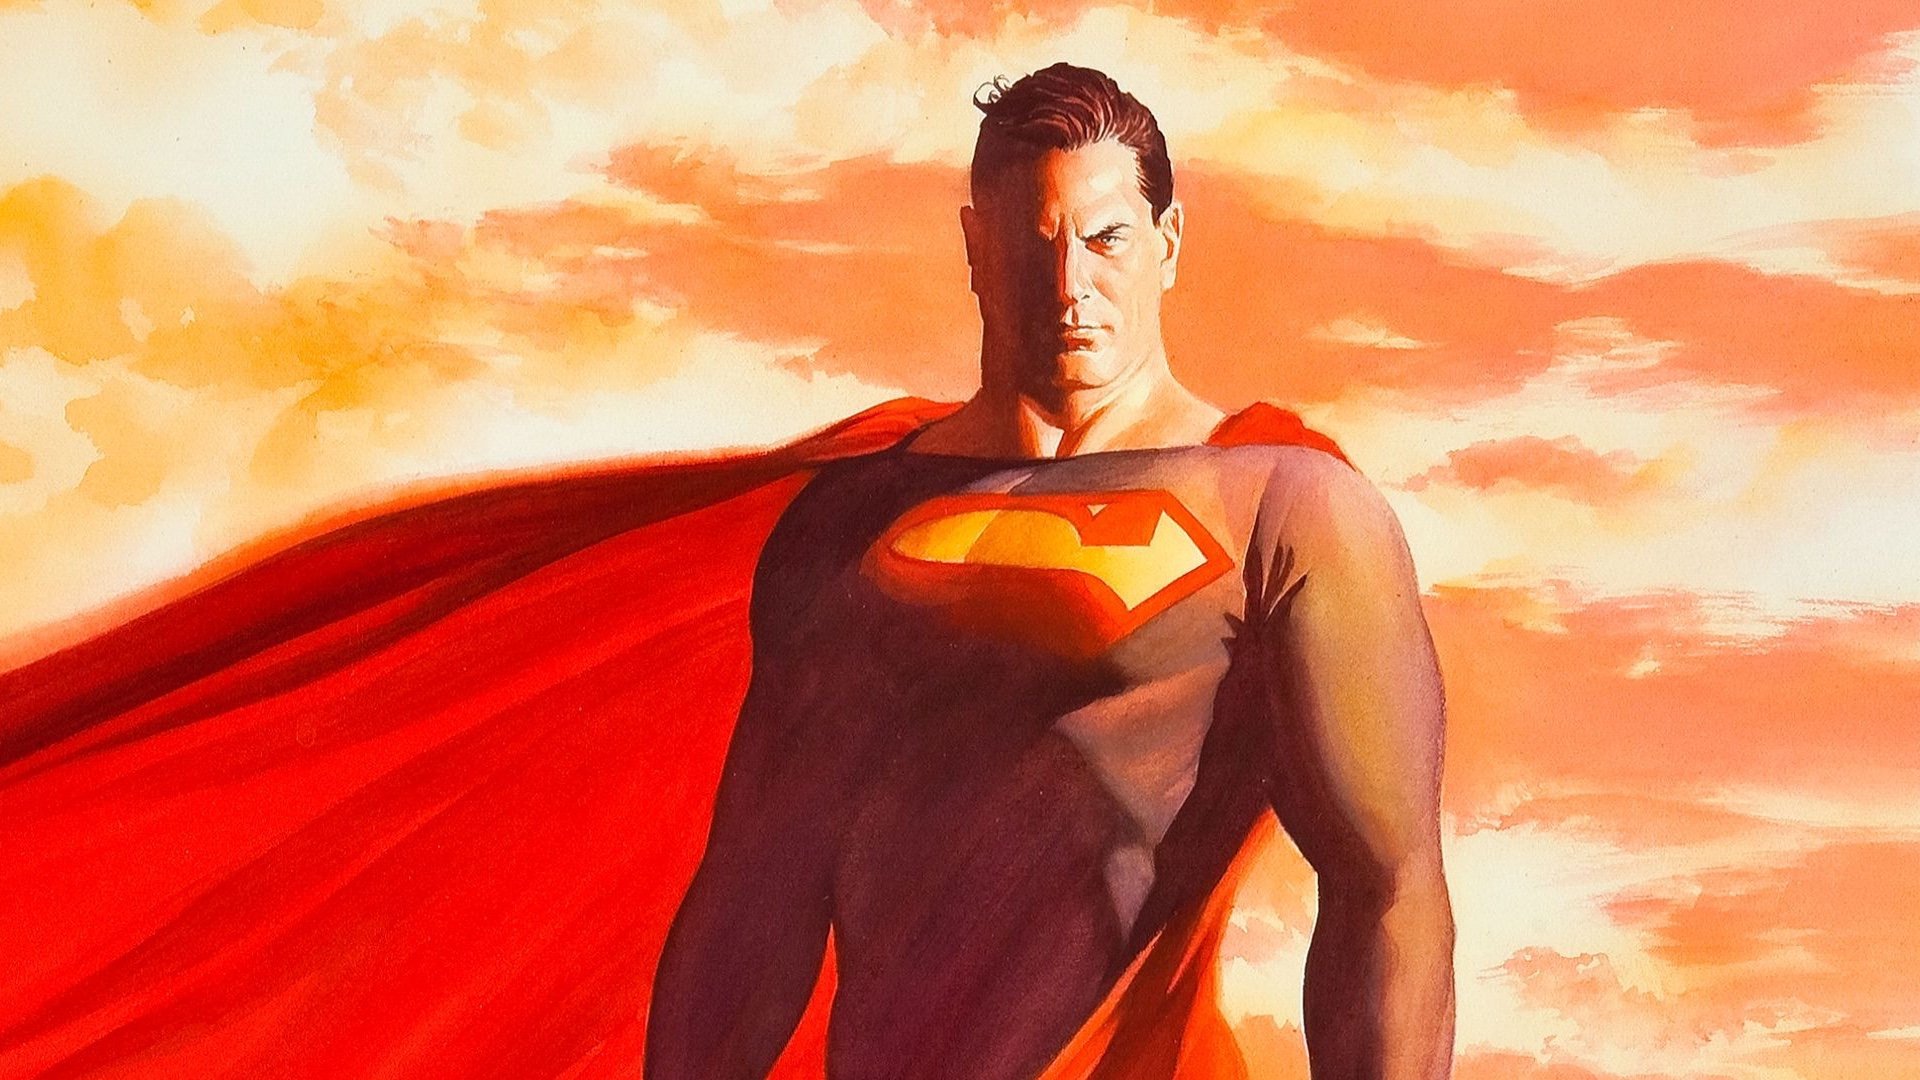 James Gunn is writing a new Superman movie that will not star Henry Cavill